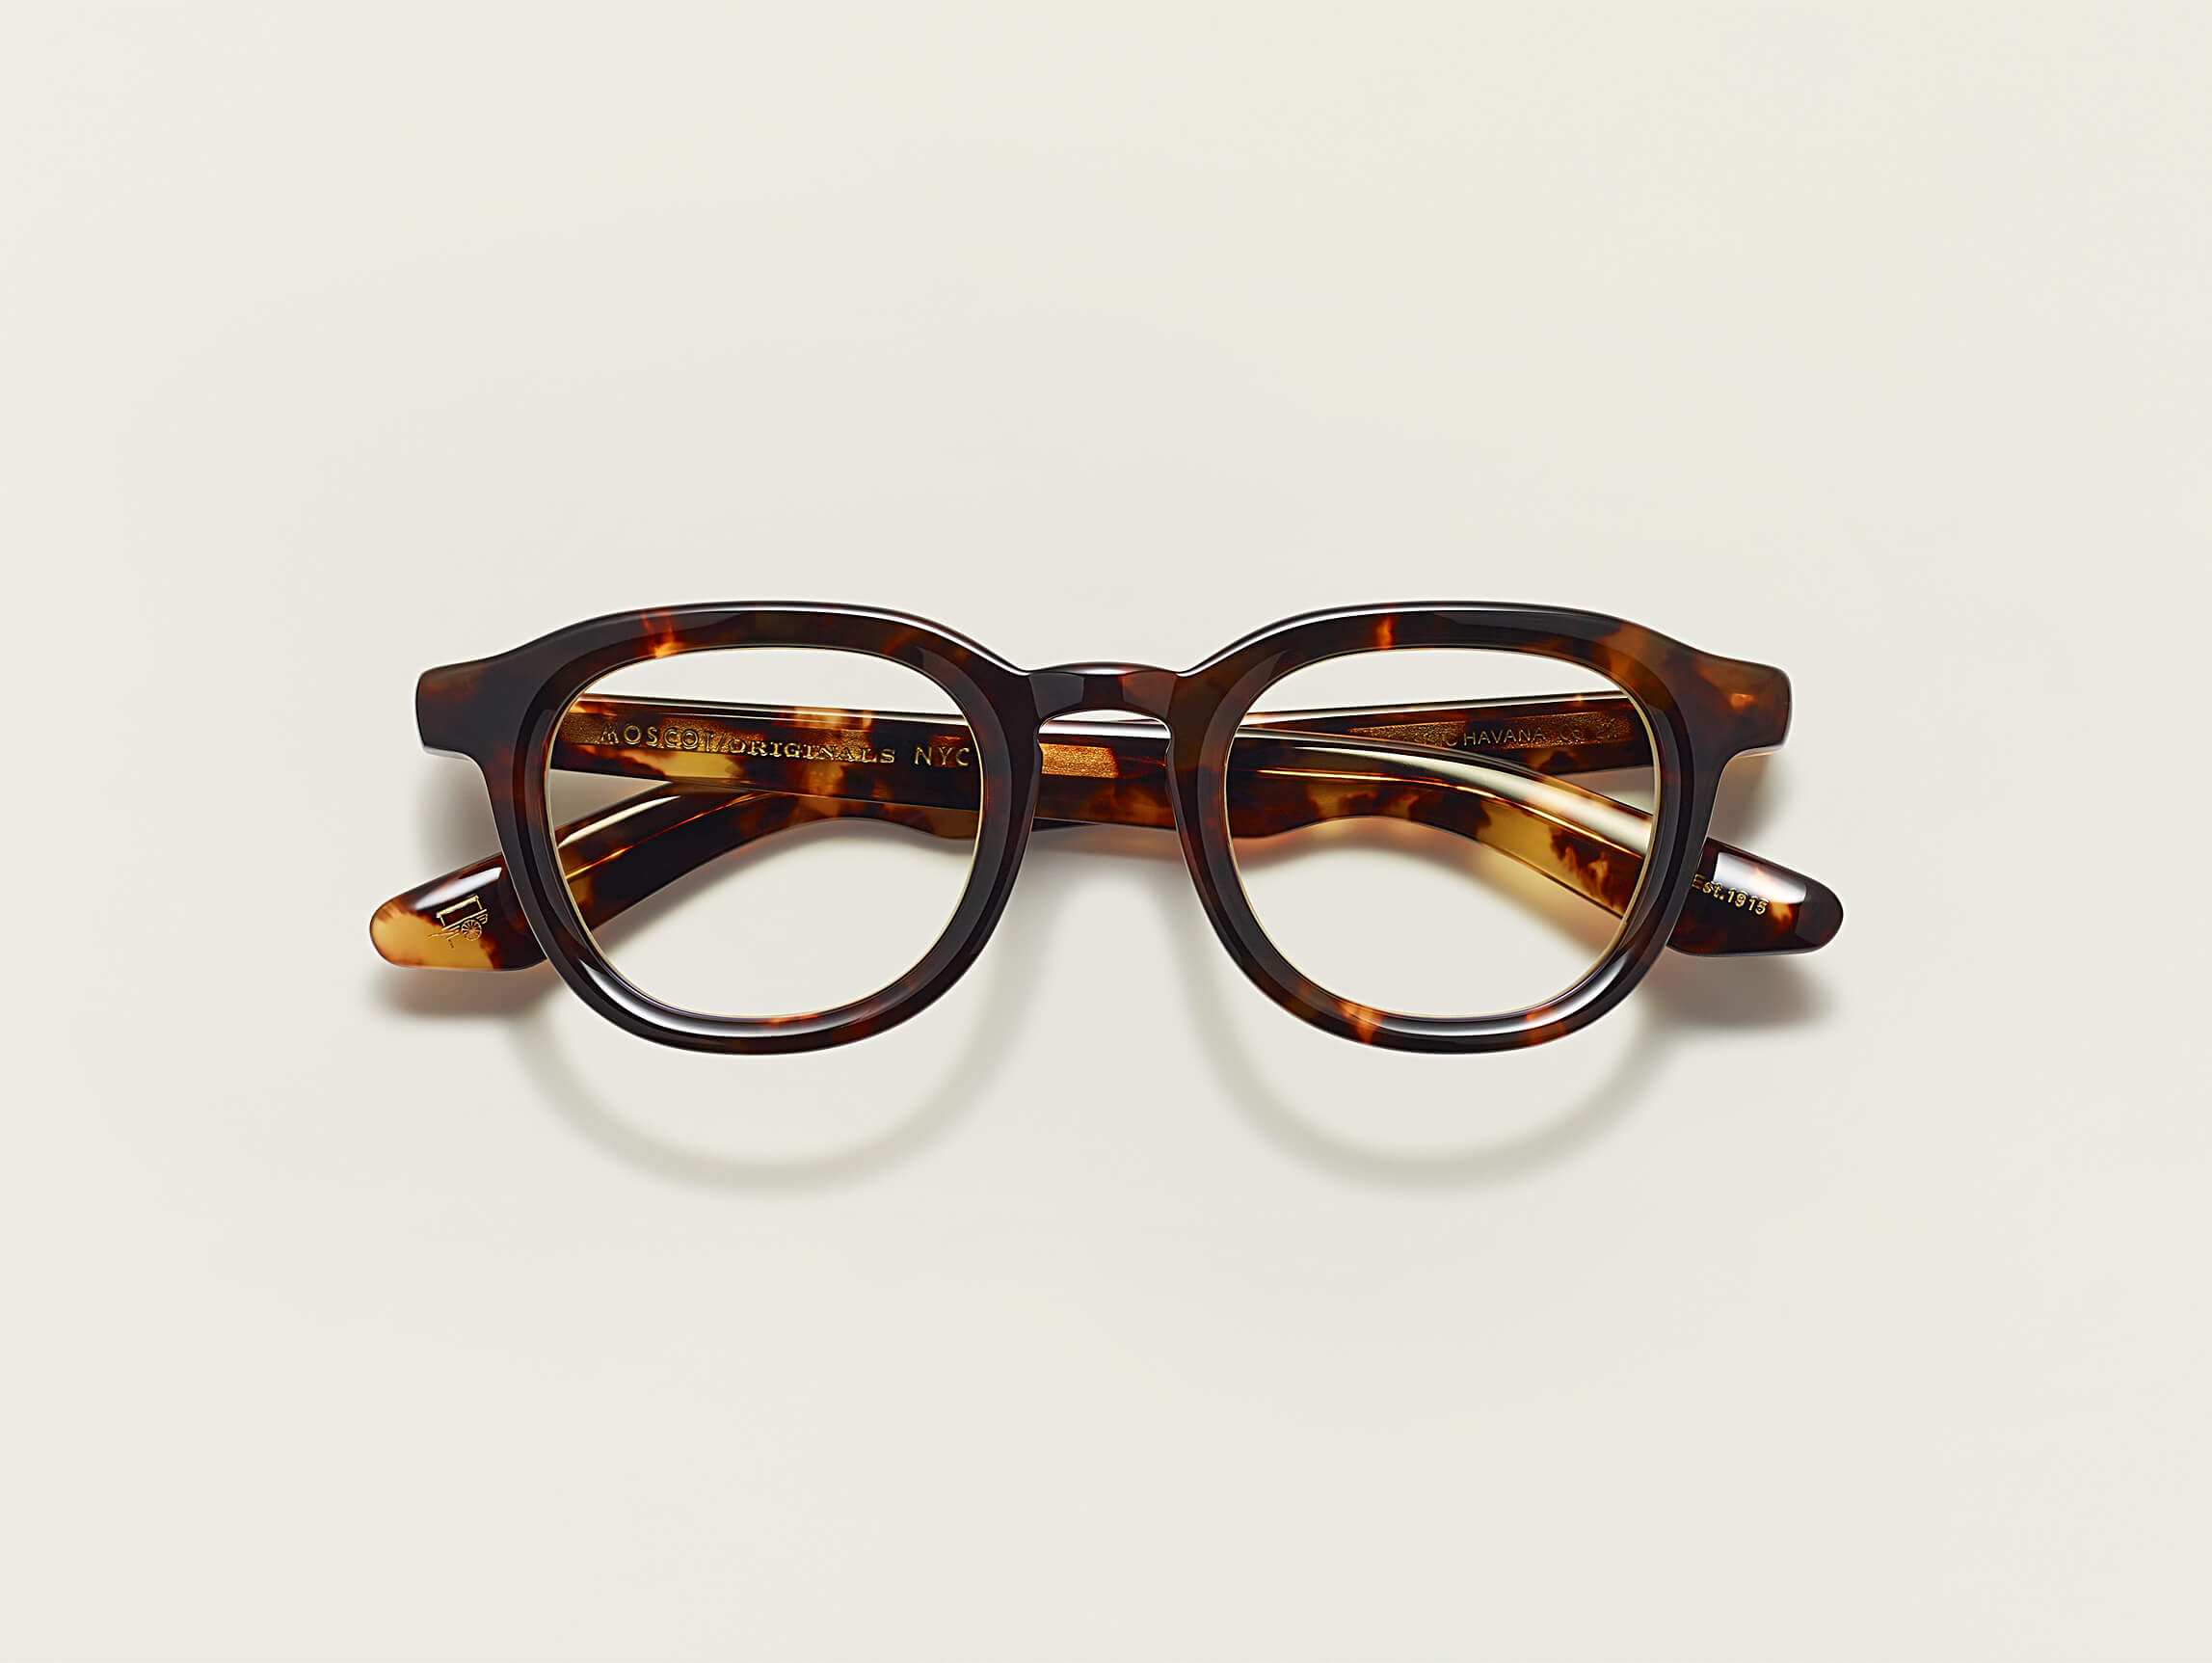 DAHVEN – MOSCOT NYC SINCE 1915